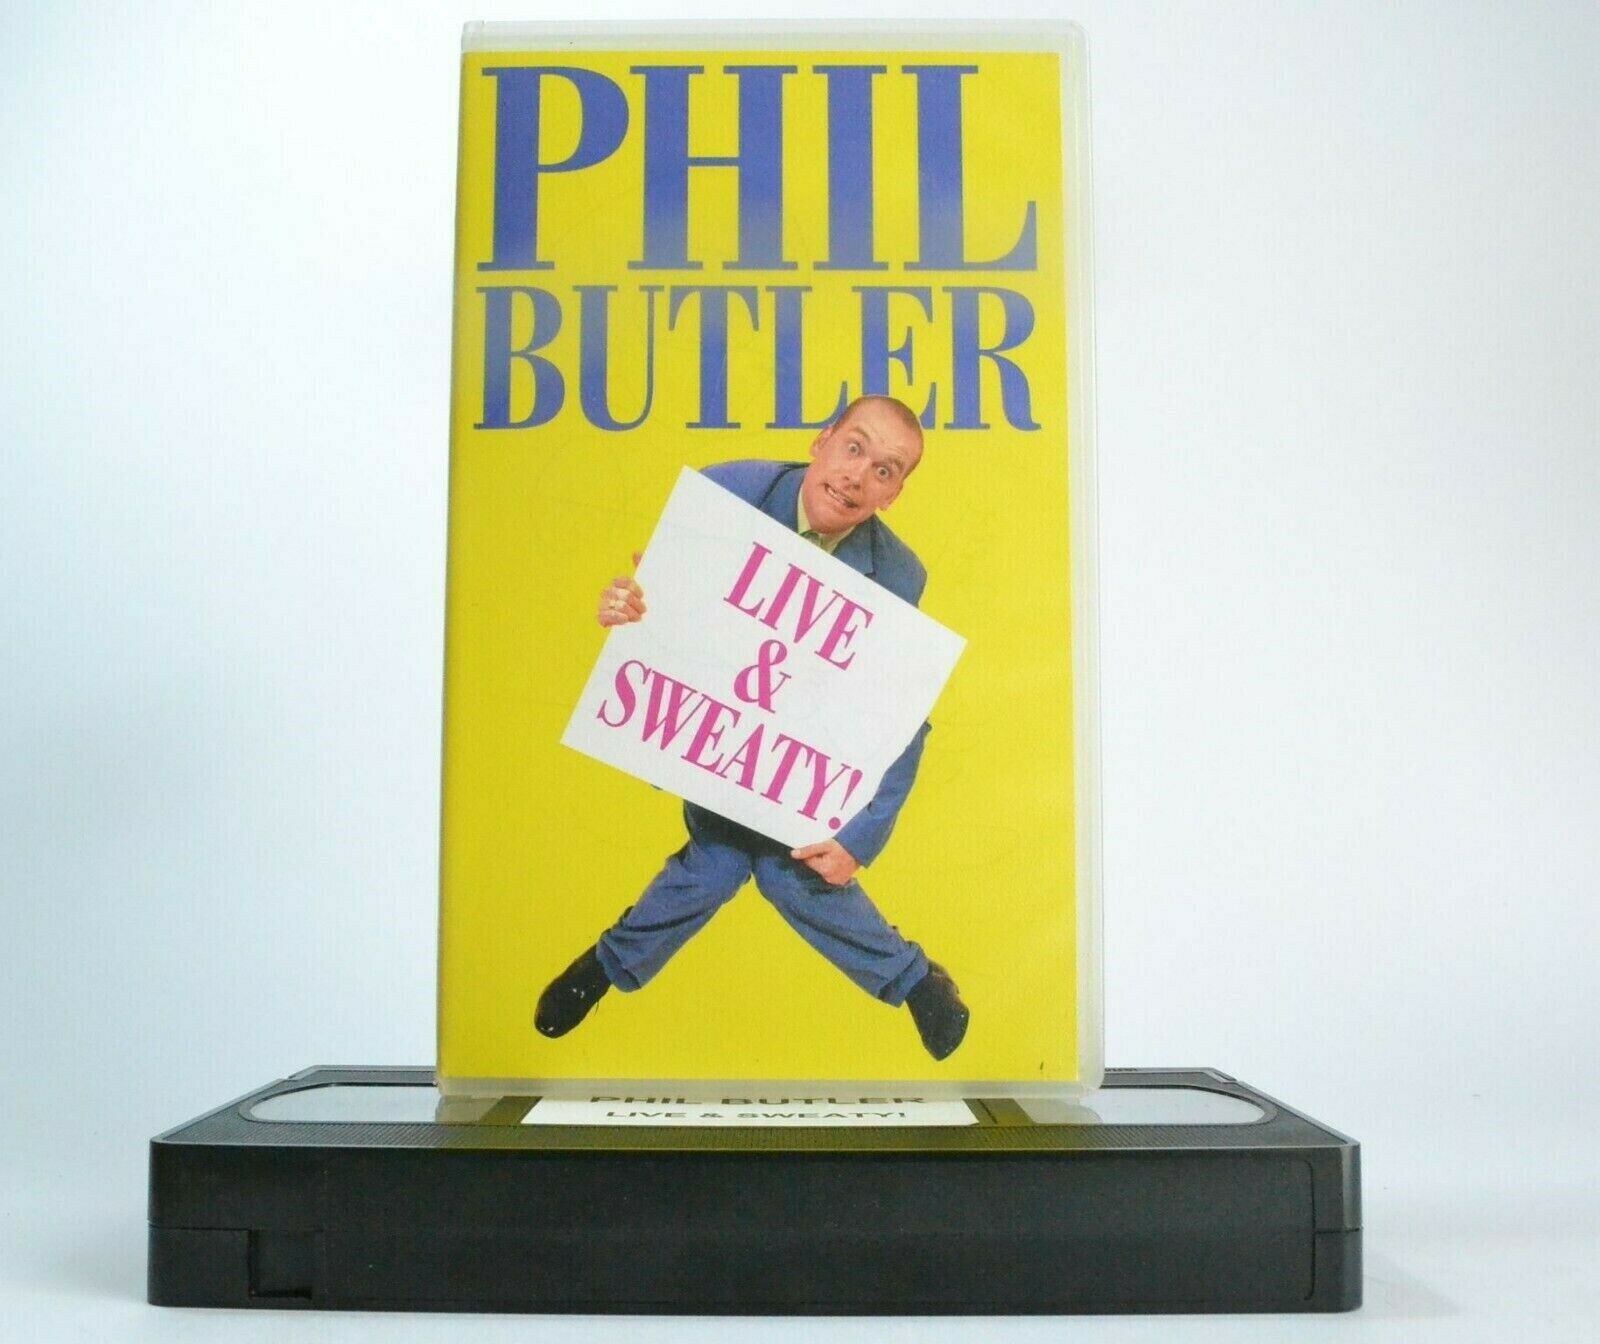 Phil Butler: Live And Sweaty - Woooyah - Stand-Up - Comedy - Signed Pal VHS-